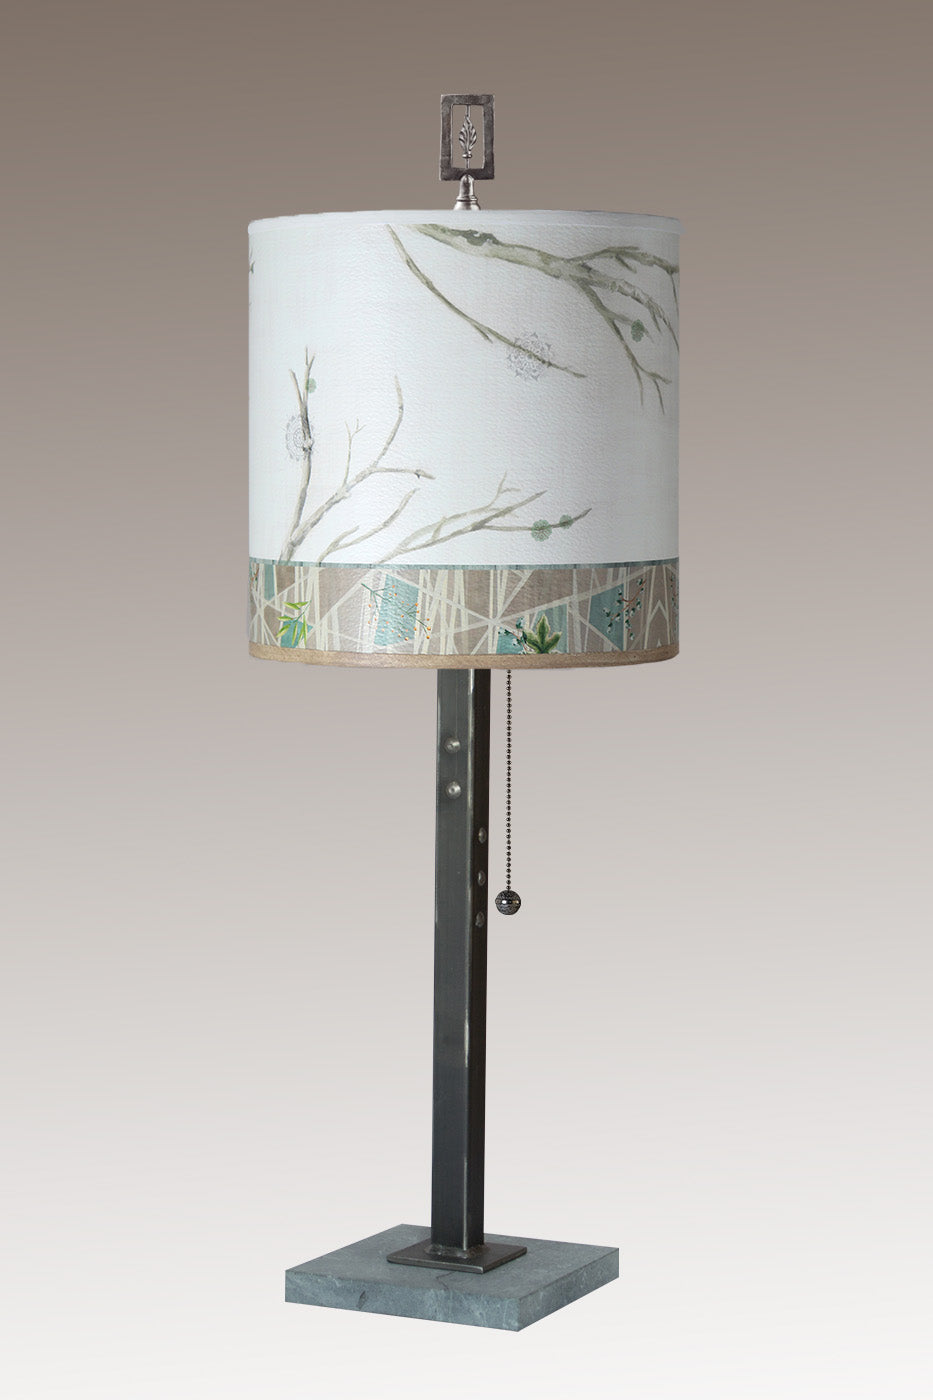 Janna Ugone & Co Table Lamps Steel Table Lamp with Medium Drum Shade in Prism Branch